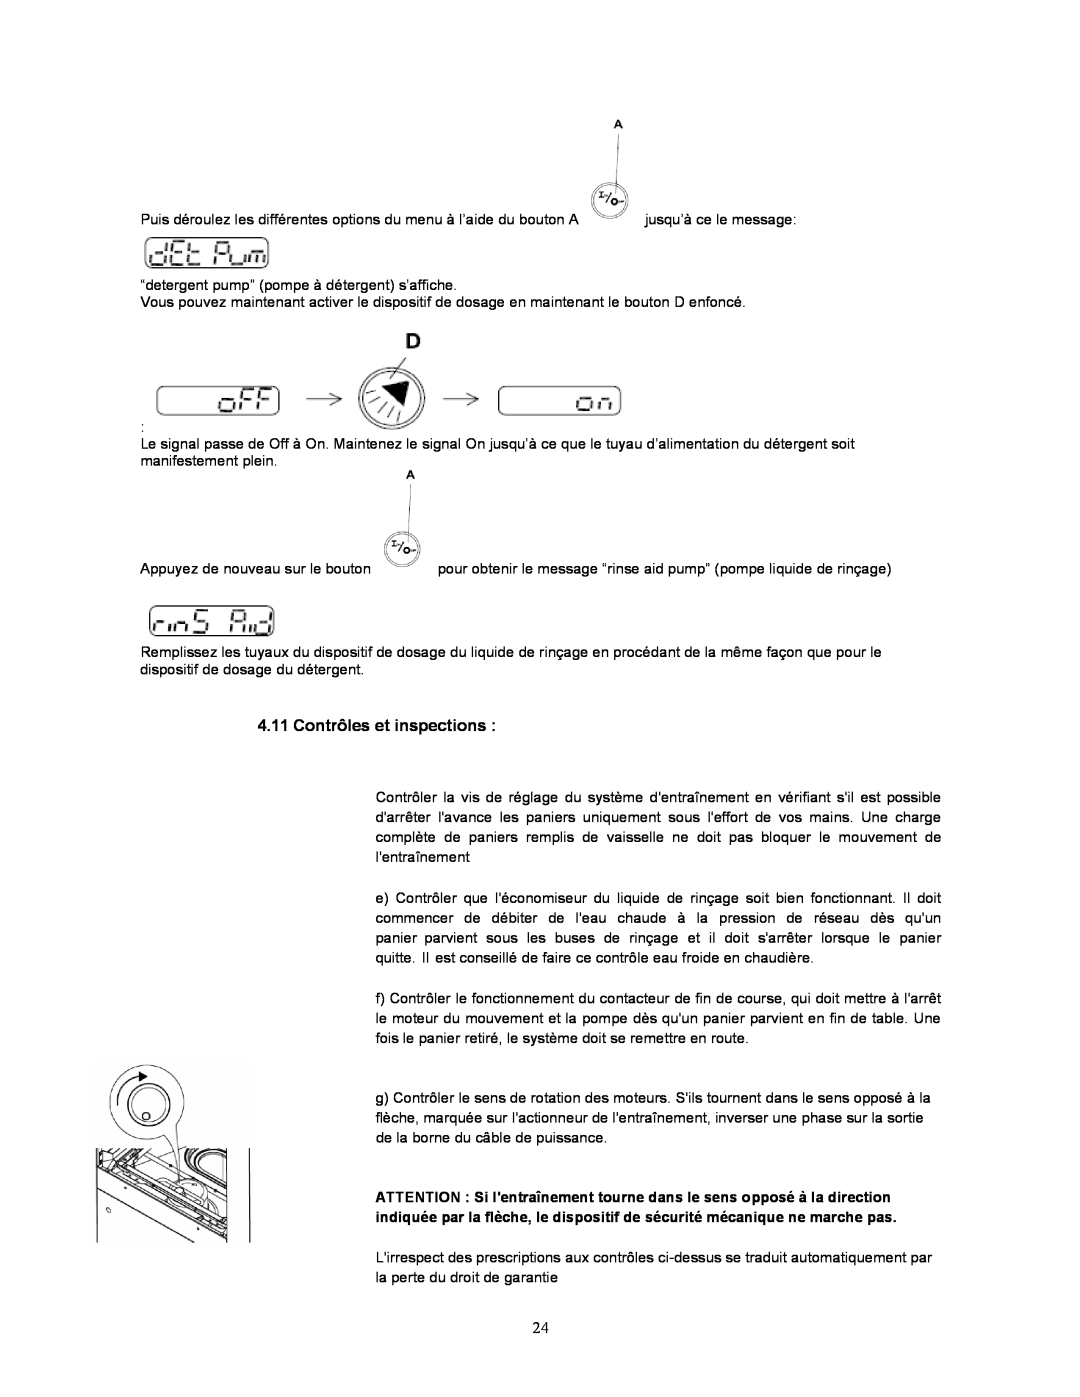 Jettech Metal Products FX-44 operation manual Contrôles et inspections 